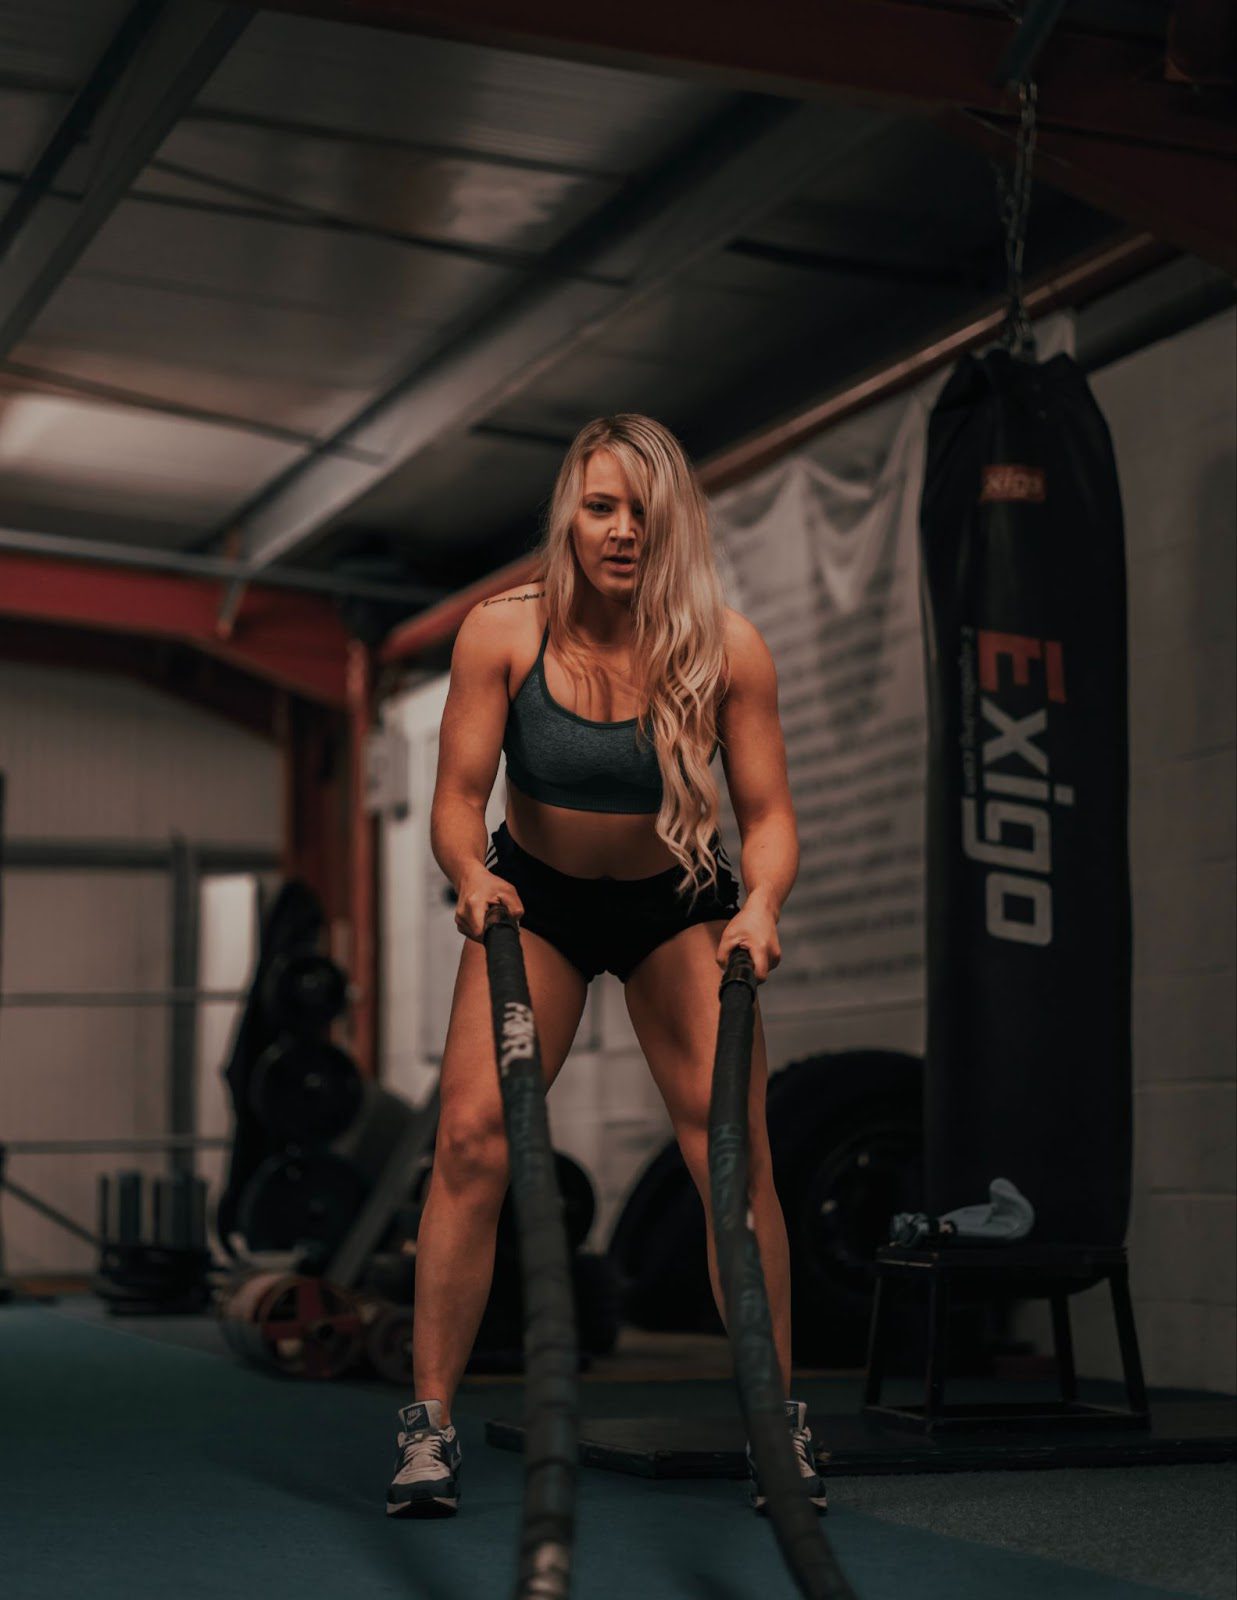 A muscular blonde woman in shorts and a sports bra holds weight ropes in a squat position at the gym.